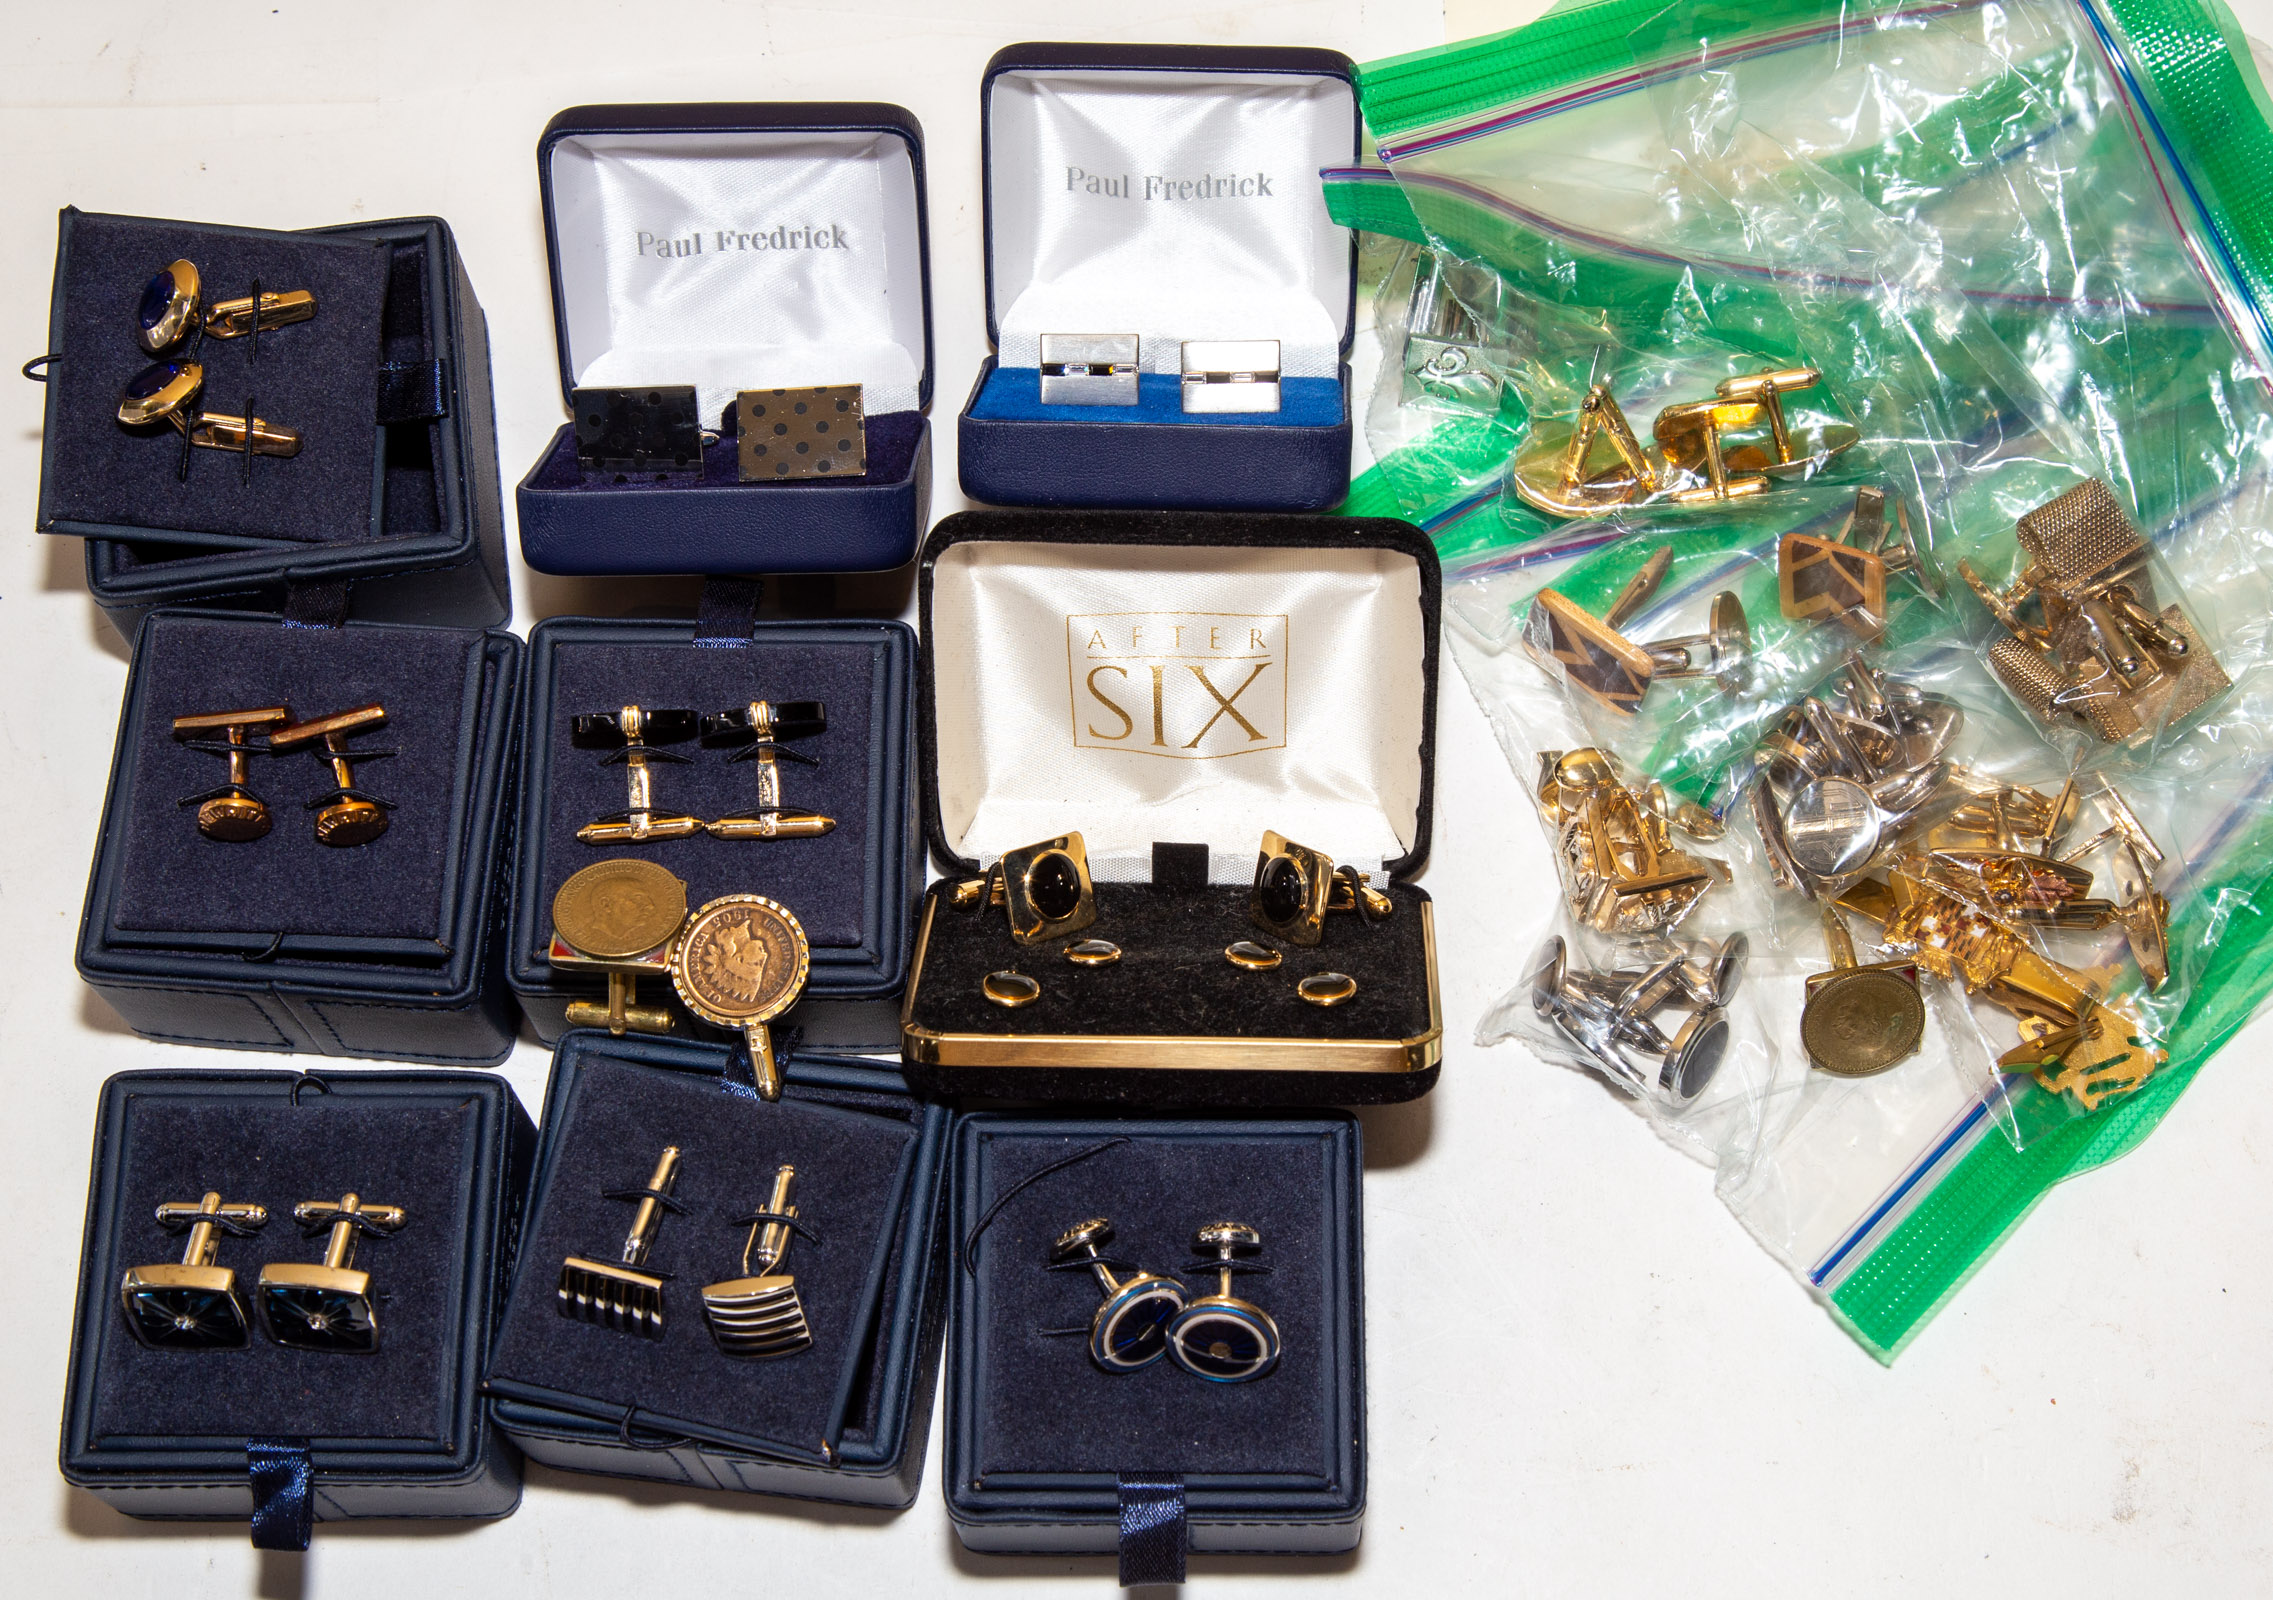 A LARGE COLLECTION OF CUFFLINKS 33457b